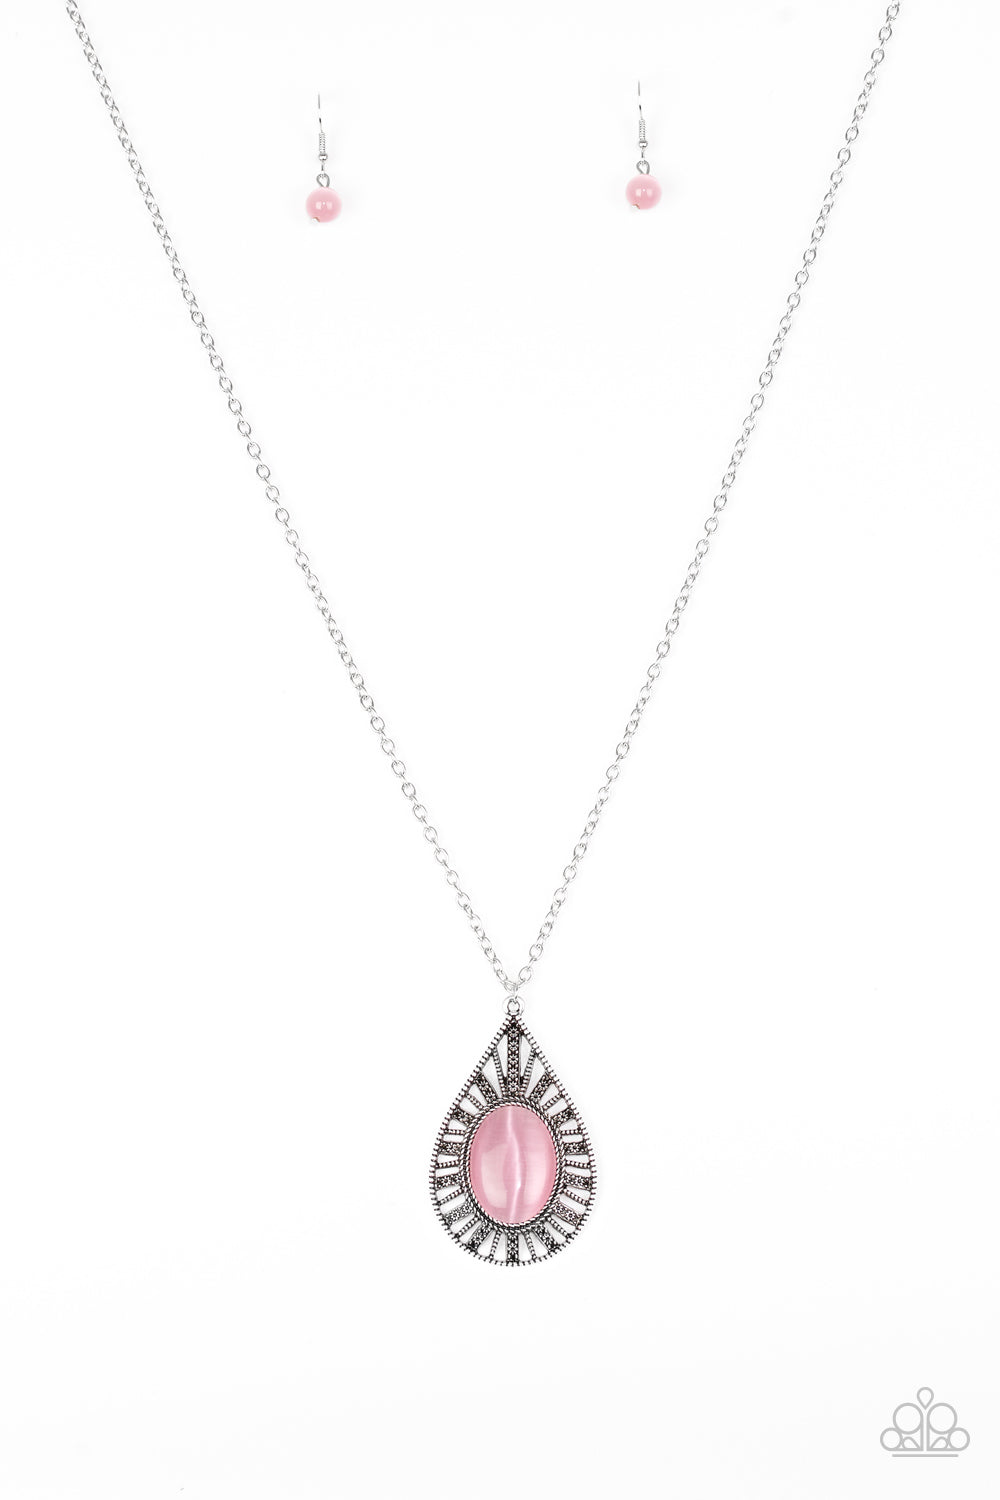 TOTAL TRANQUILITY - PINK NECKLACE